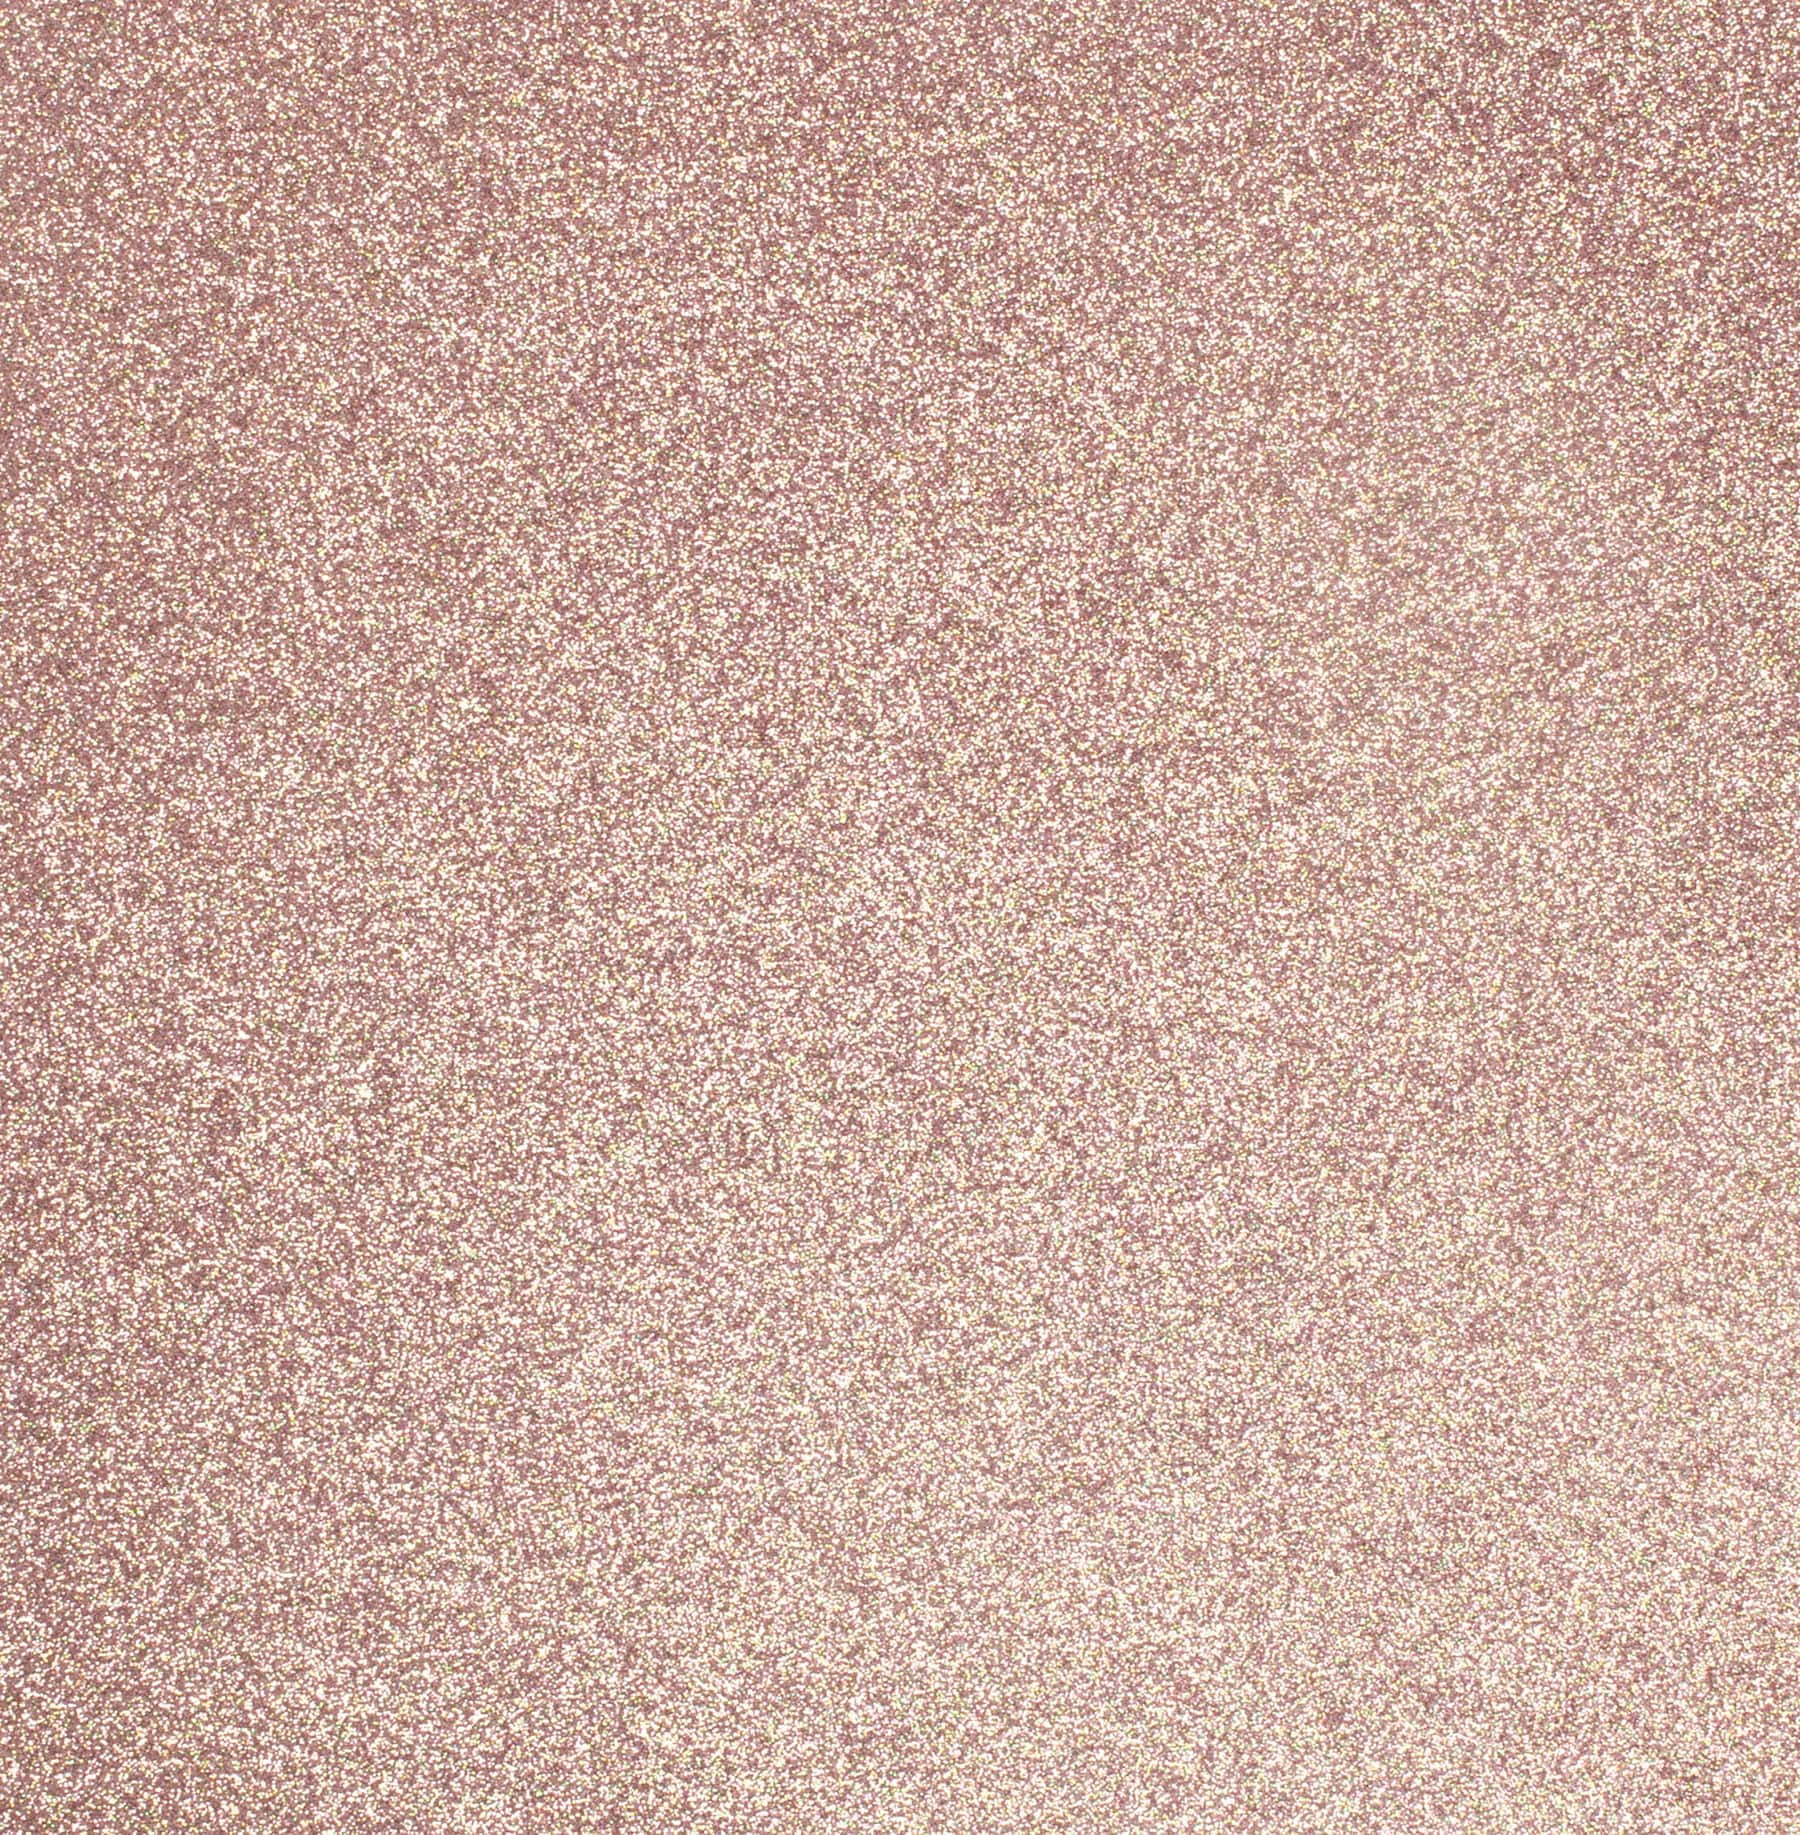 30 Pack: Light Pink Fine Glitter Paper by Recollections, 12 inch x 12 inch, Size: 12” x 12”